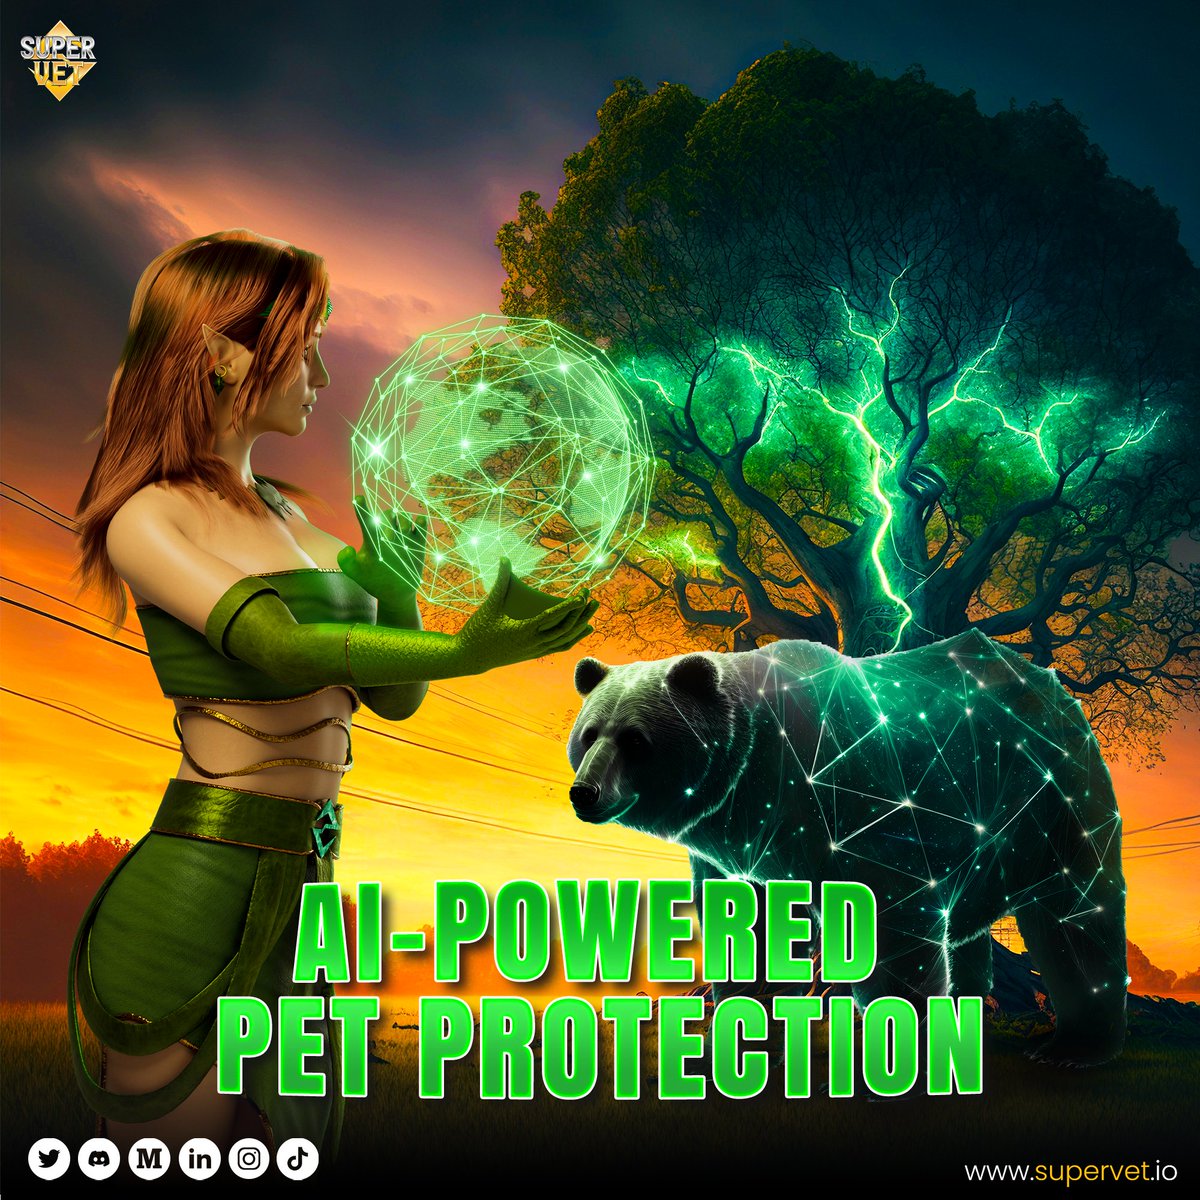 🐾 Prepared for an #AI-powered pet care revolution - Super Vet is here to amaze!

Stay tuned for exciting updates! 📲🐶
⏩discord.com/invite/J3rywtp…

#MCMComicCon #HongKong #CryptoTwitter #Airdrops #BRC20 #Batman #GameFi #VR #supervet #ArtificialIntelligence #AnimalRights #GPS